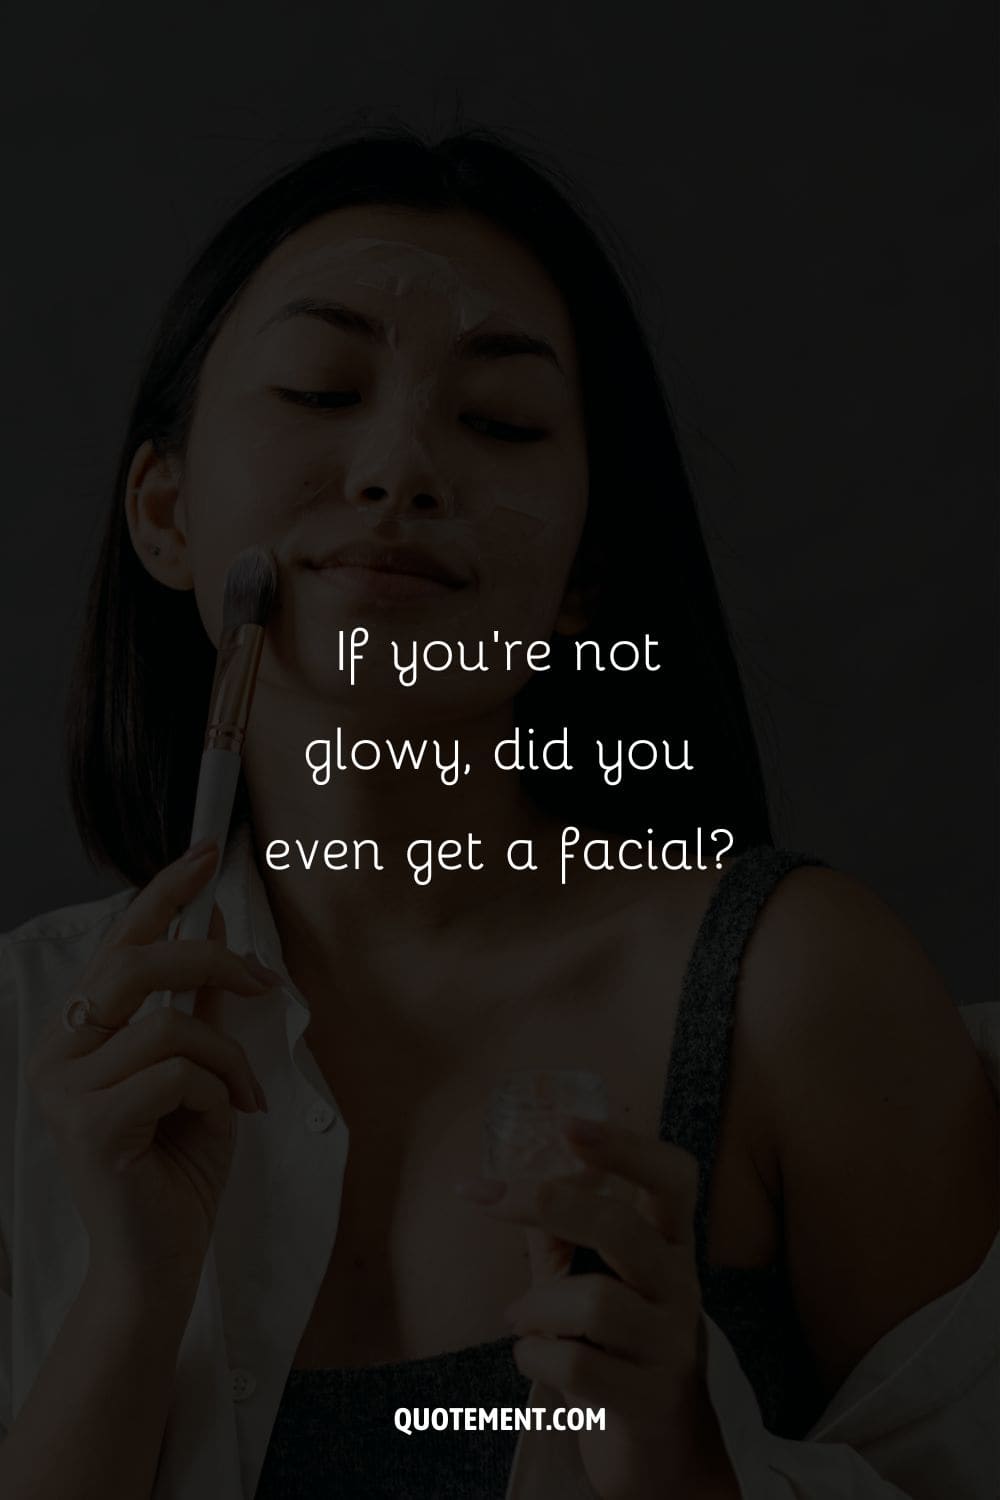 If you’re not glowy, did you even get a facial